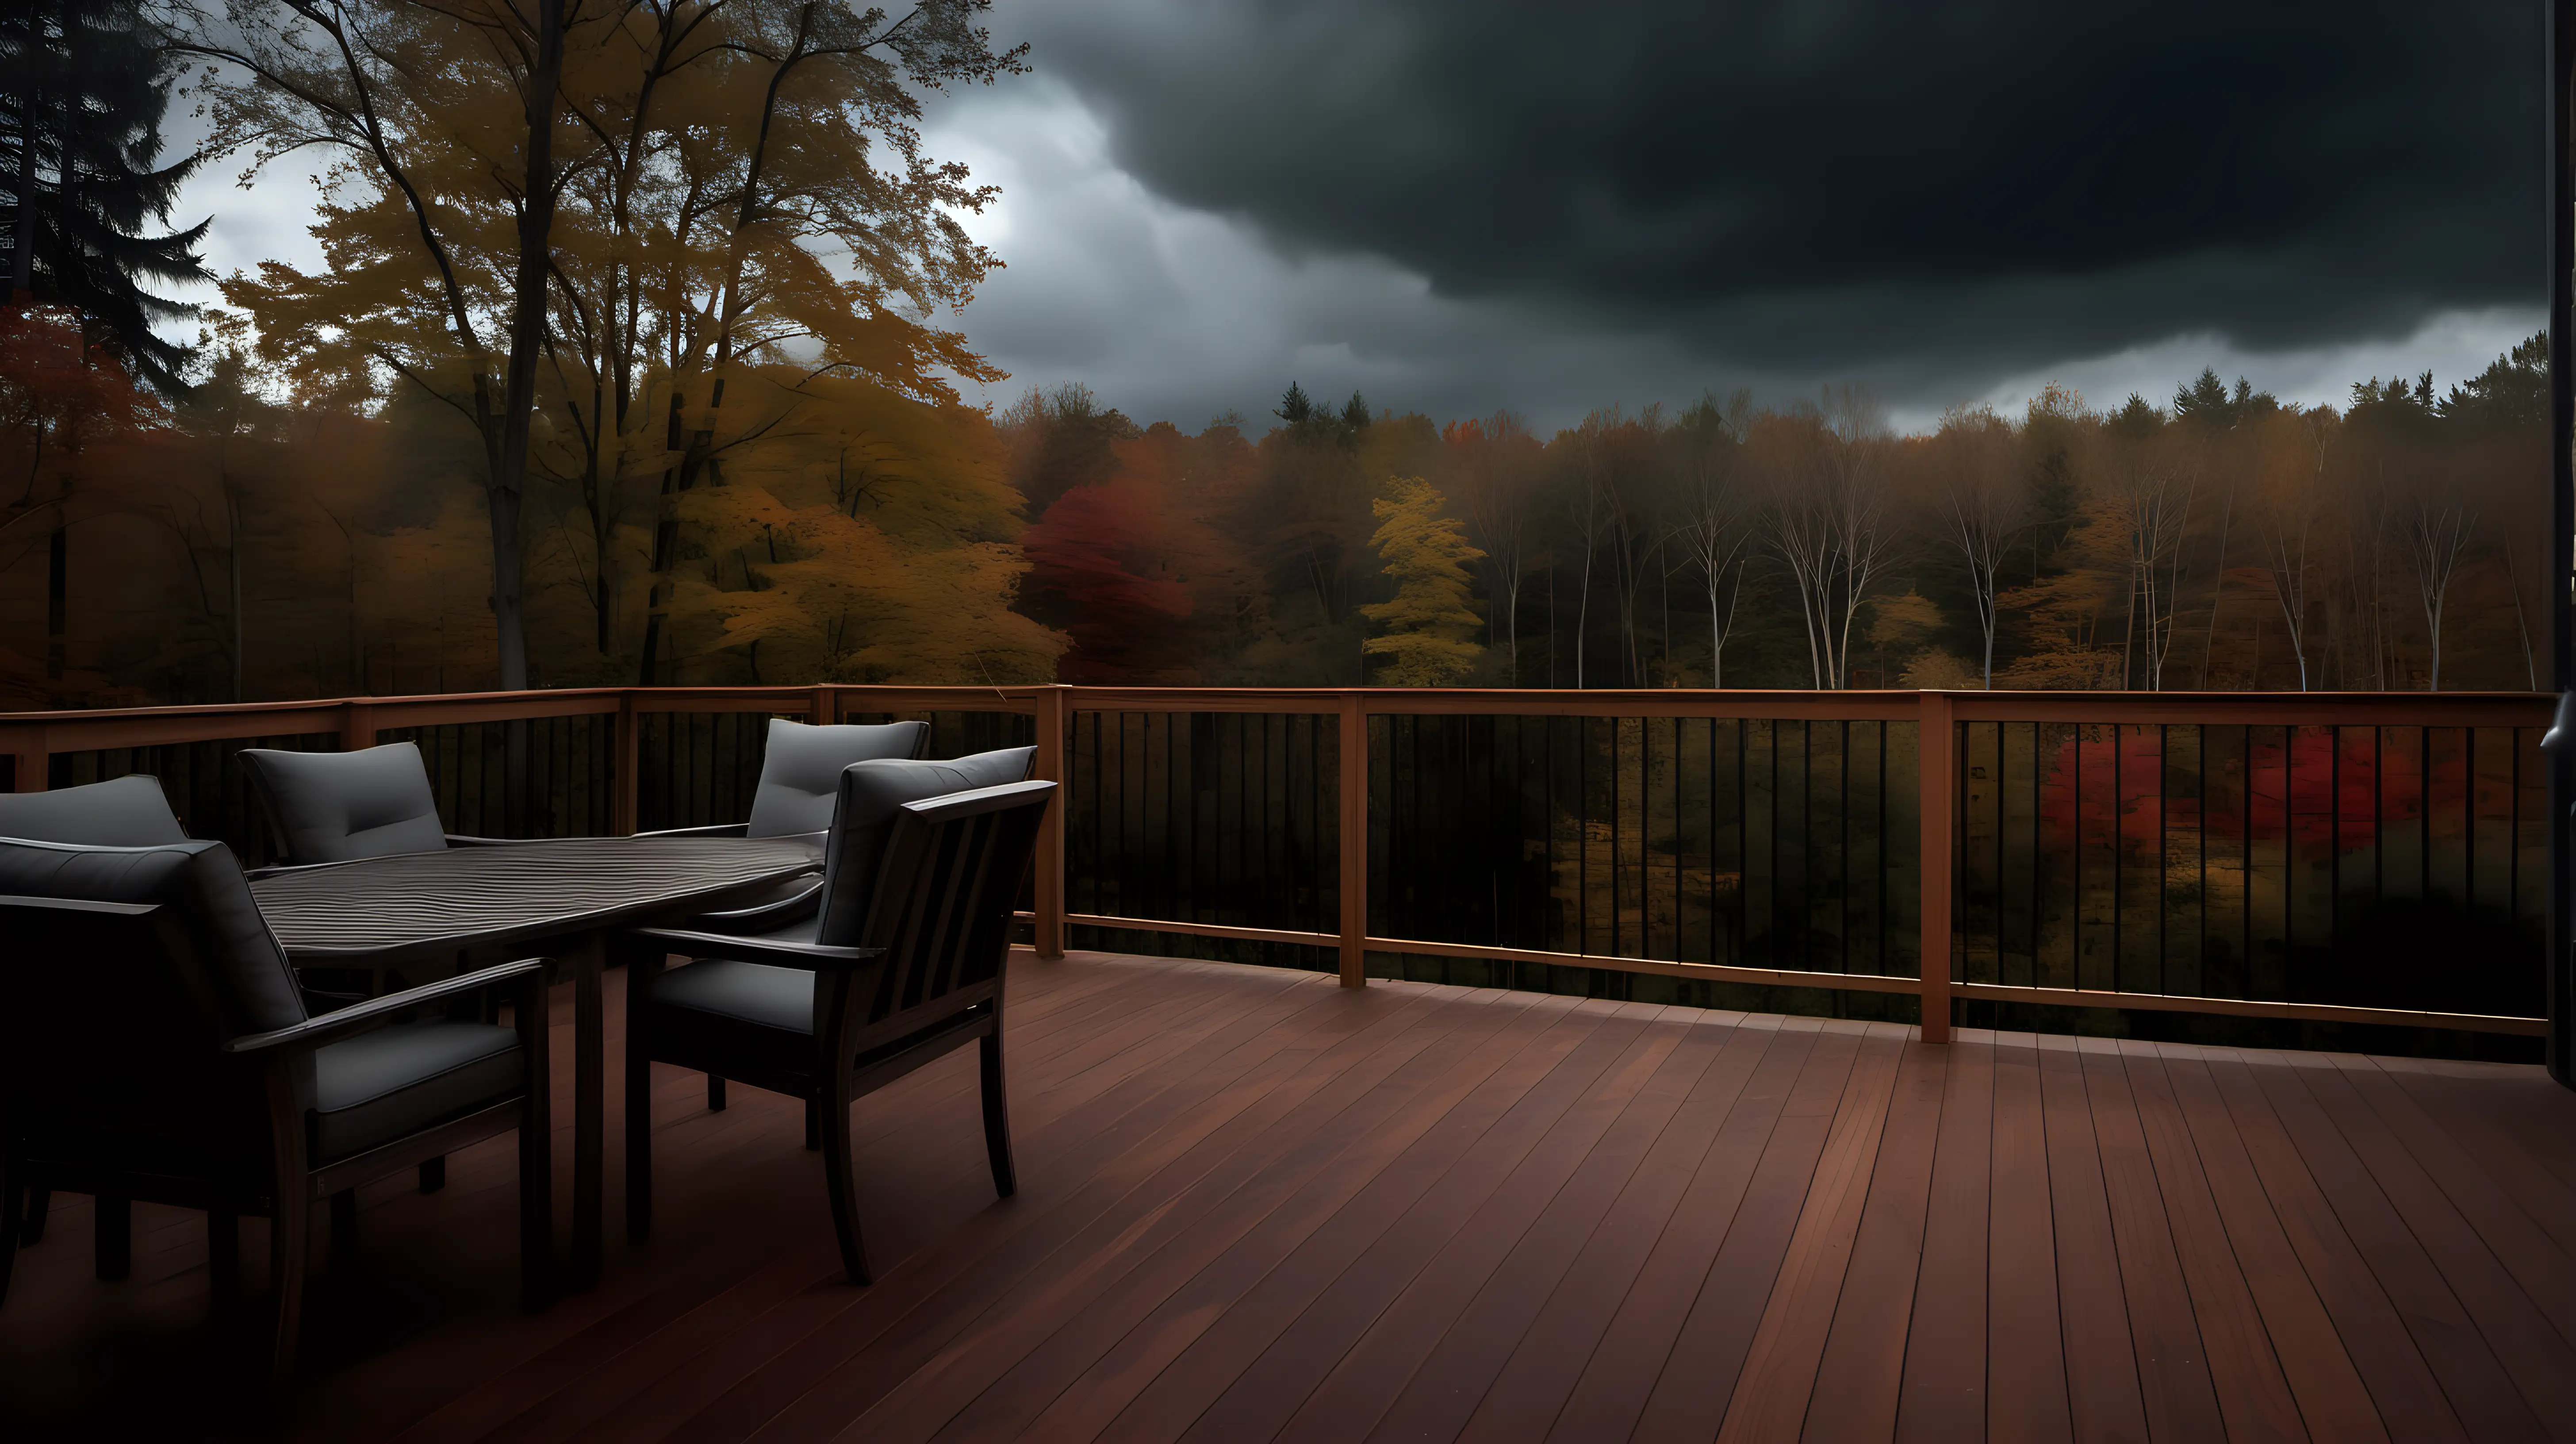 A wooden deck with patio furniture, looking out towards a forest in autumn at dusk, dark clouds overhead. Sharp focus, photographic quality, cinematic lighting.